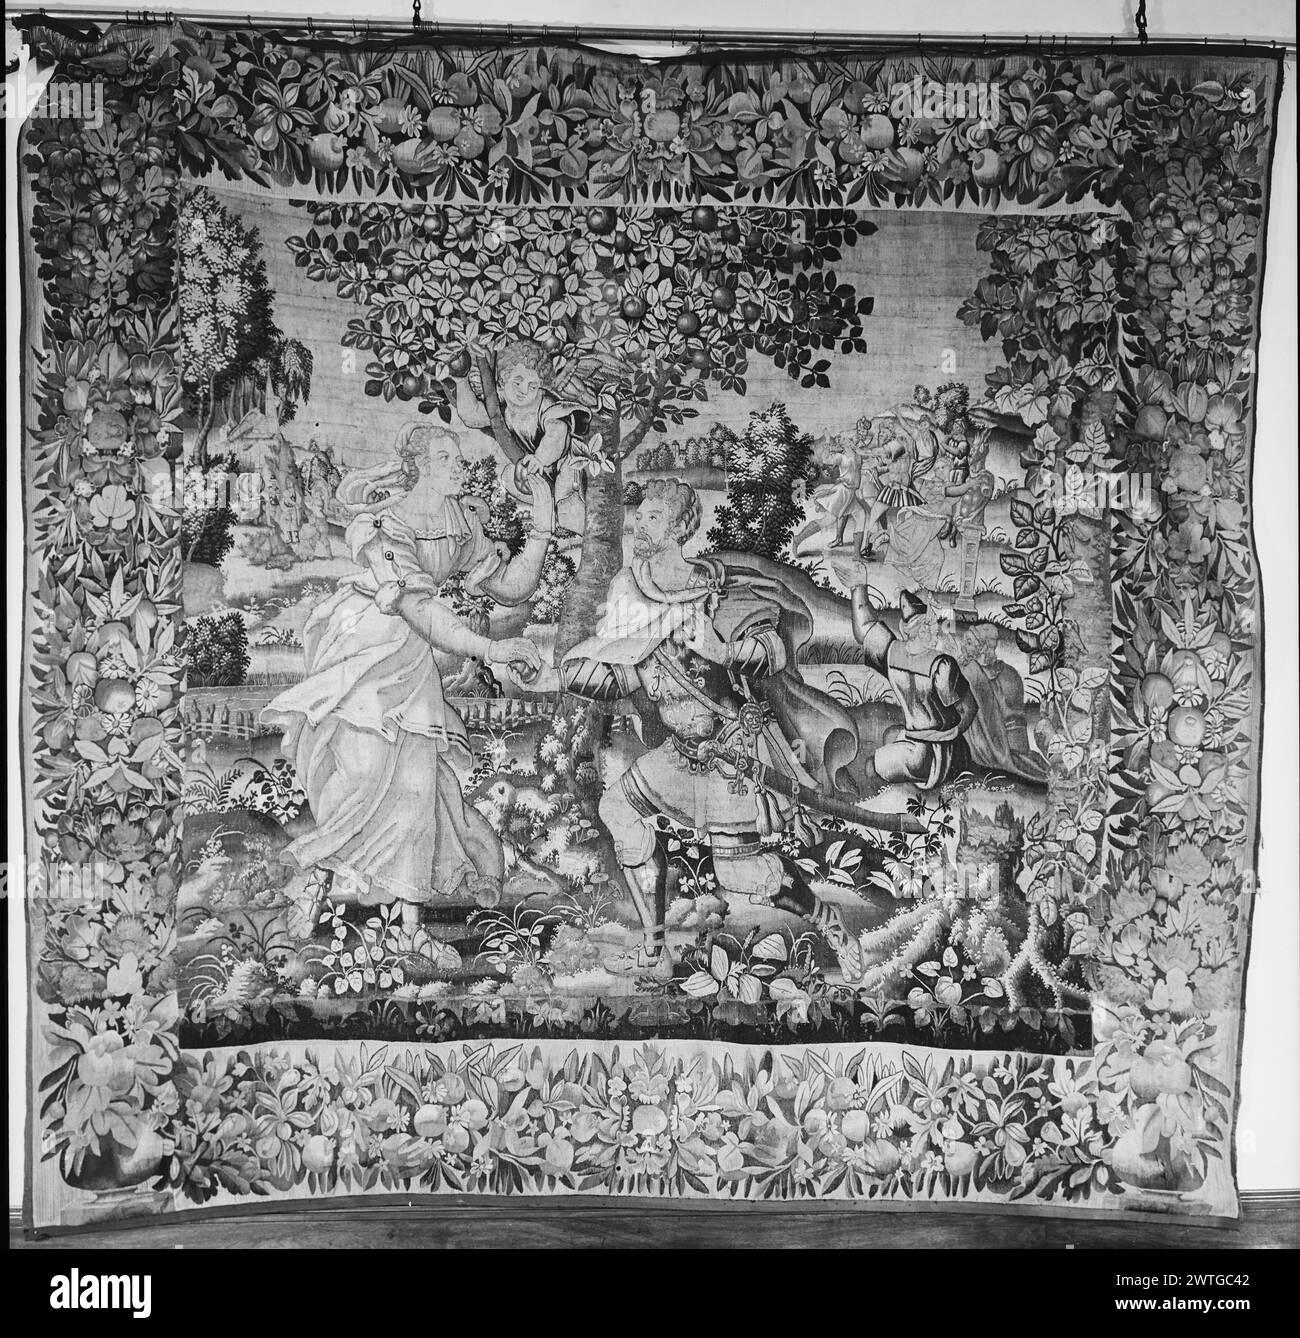 Venus (Aphrodite) presents Hippomenes with golden apples. unknown c. 1540 Tapestry Dimensions: H 11'8' x W 12'6' Tapestry Materials/Techniques: unknown Culture: Flemish Weaving Center: unknown Ownership History: French & Co. In landscape, Venus presents Hippomenes with golden apples as received from fruit-picking Cupid in tree above (center foreground); male suitor losing race against Atalanta & being punished (R background) (BRD) garlands of flowers, foliage & oversize fruit springing from vessels on plinths in lower corners Border not original to this tapestry. French & Co. stock sheet missi Stock Photo